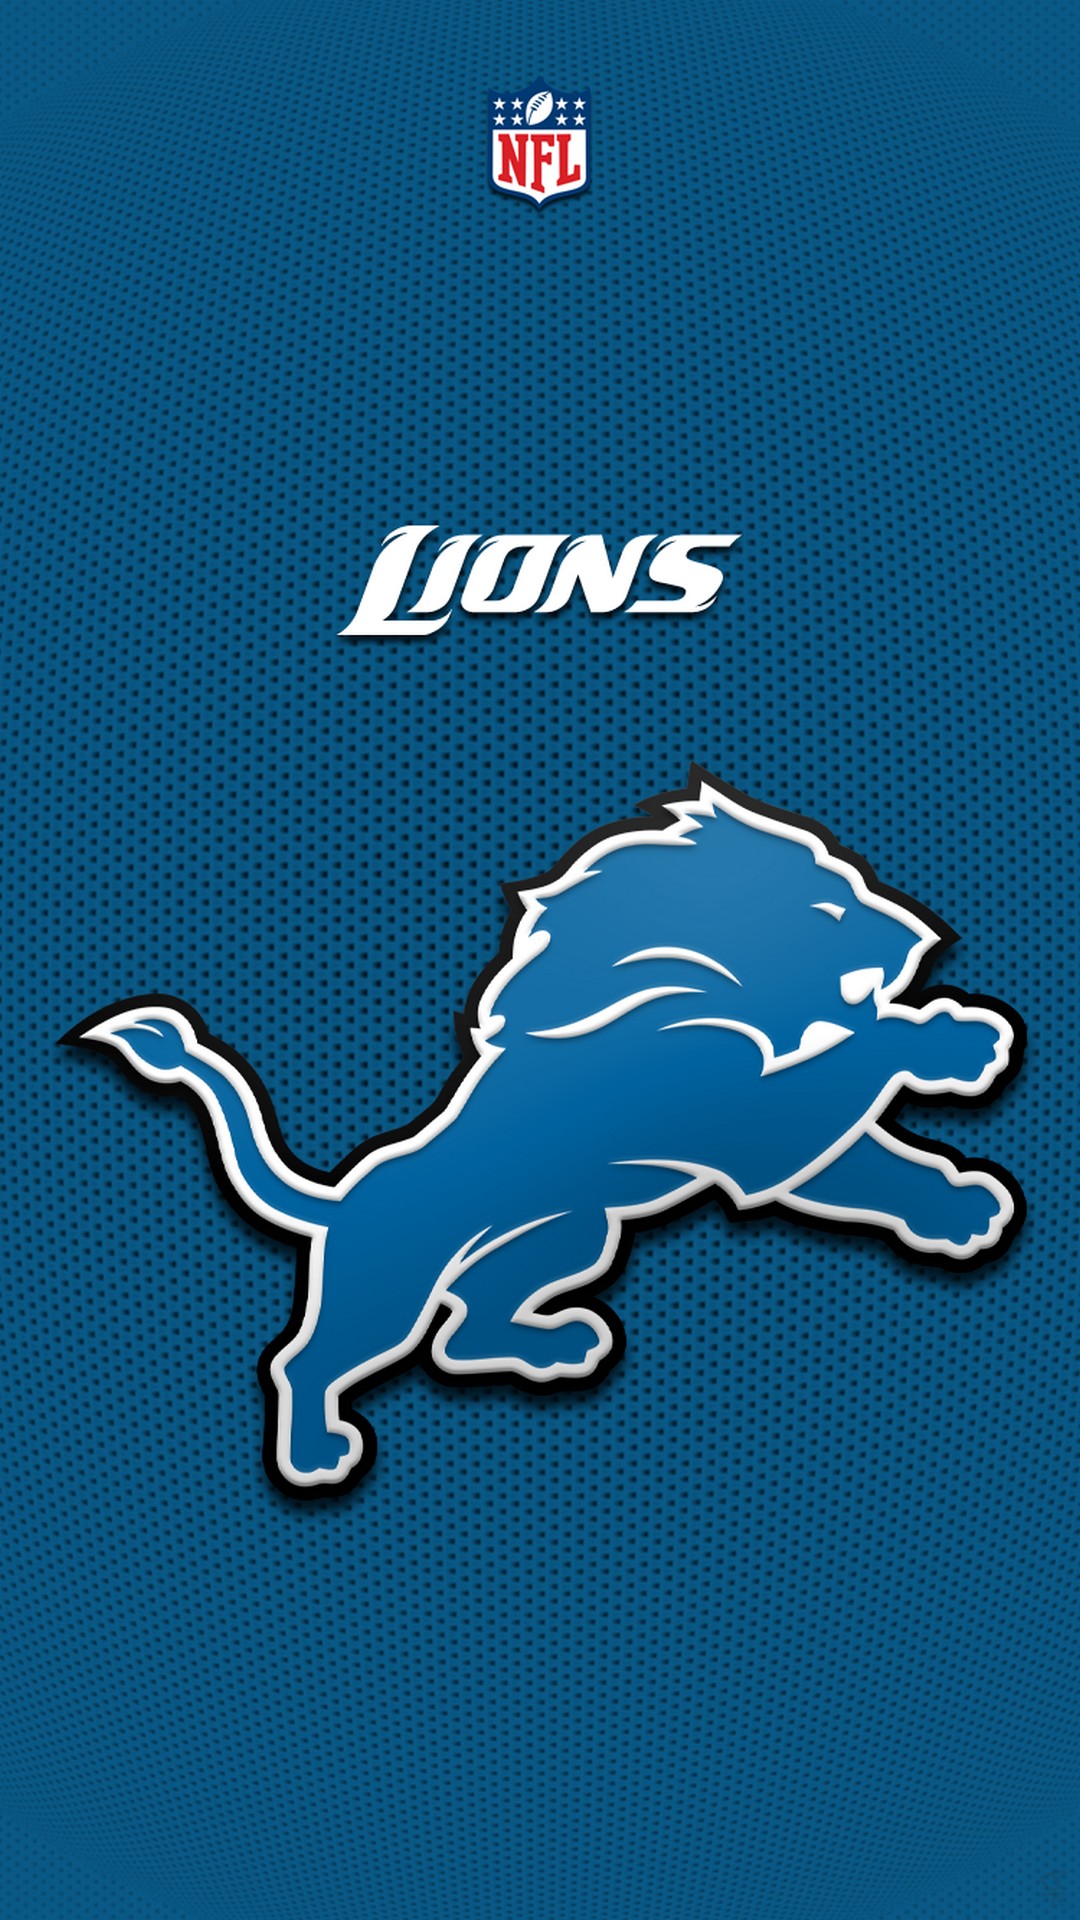 Detroit Lions iPhone Wallpaper Design With high-resolution 1080X1920 pixel. Download and set as wallpaper for Apple iPhone X, XS Max, XR, 8, 7, 6, SE, iPad, Android